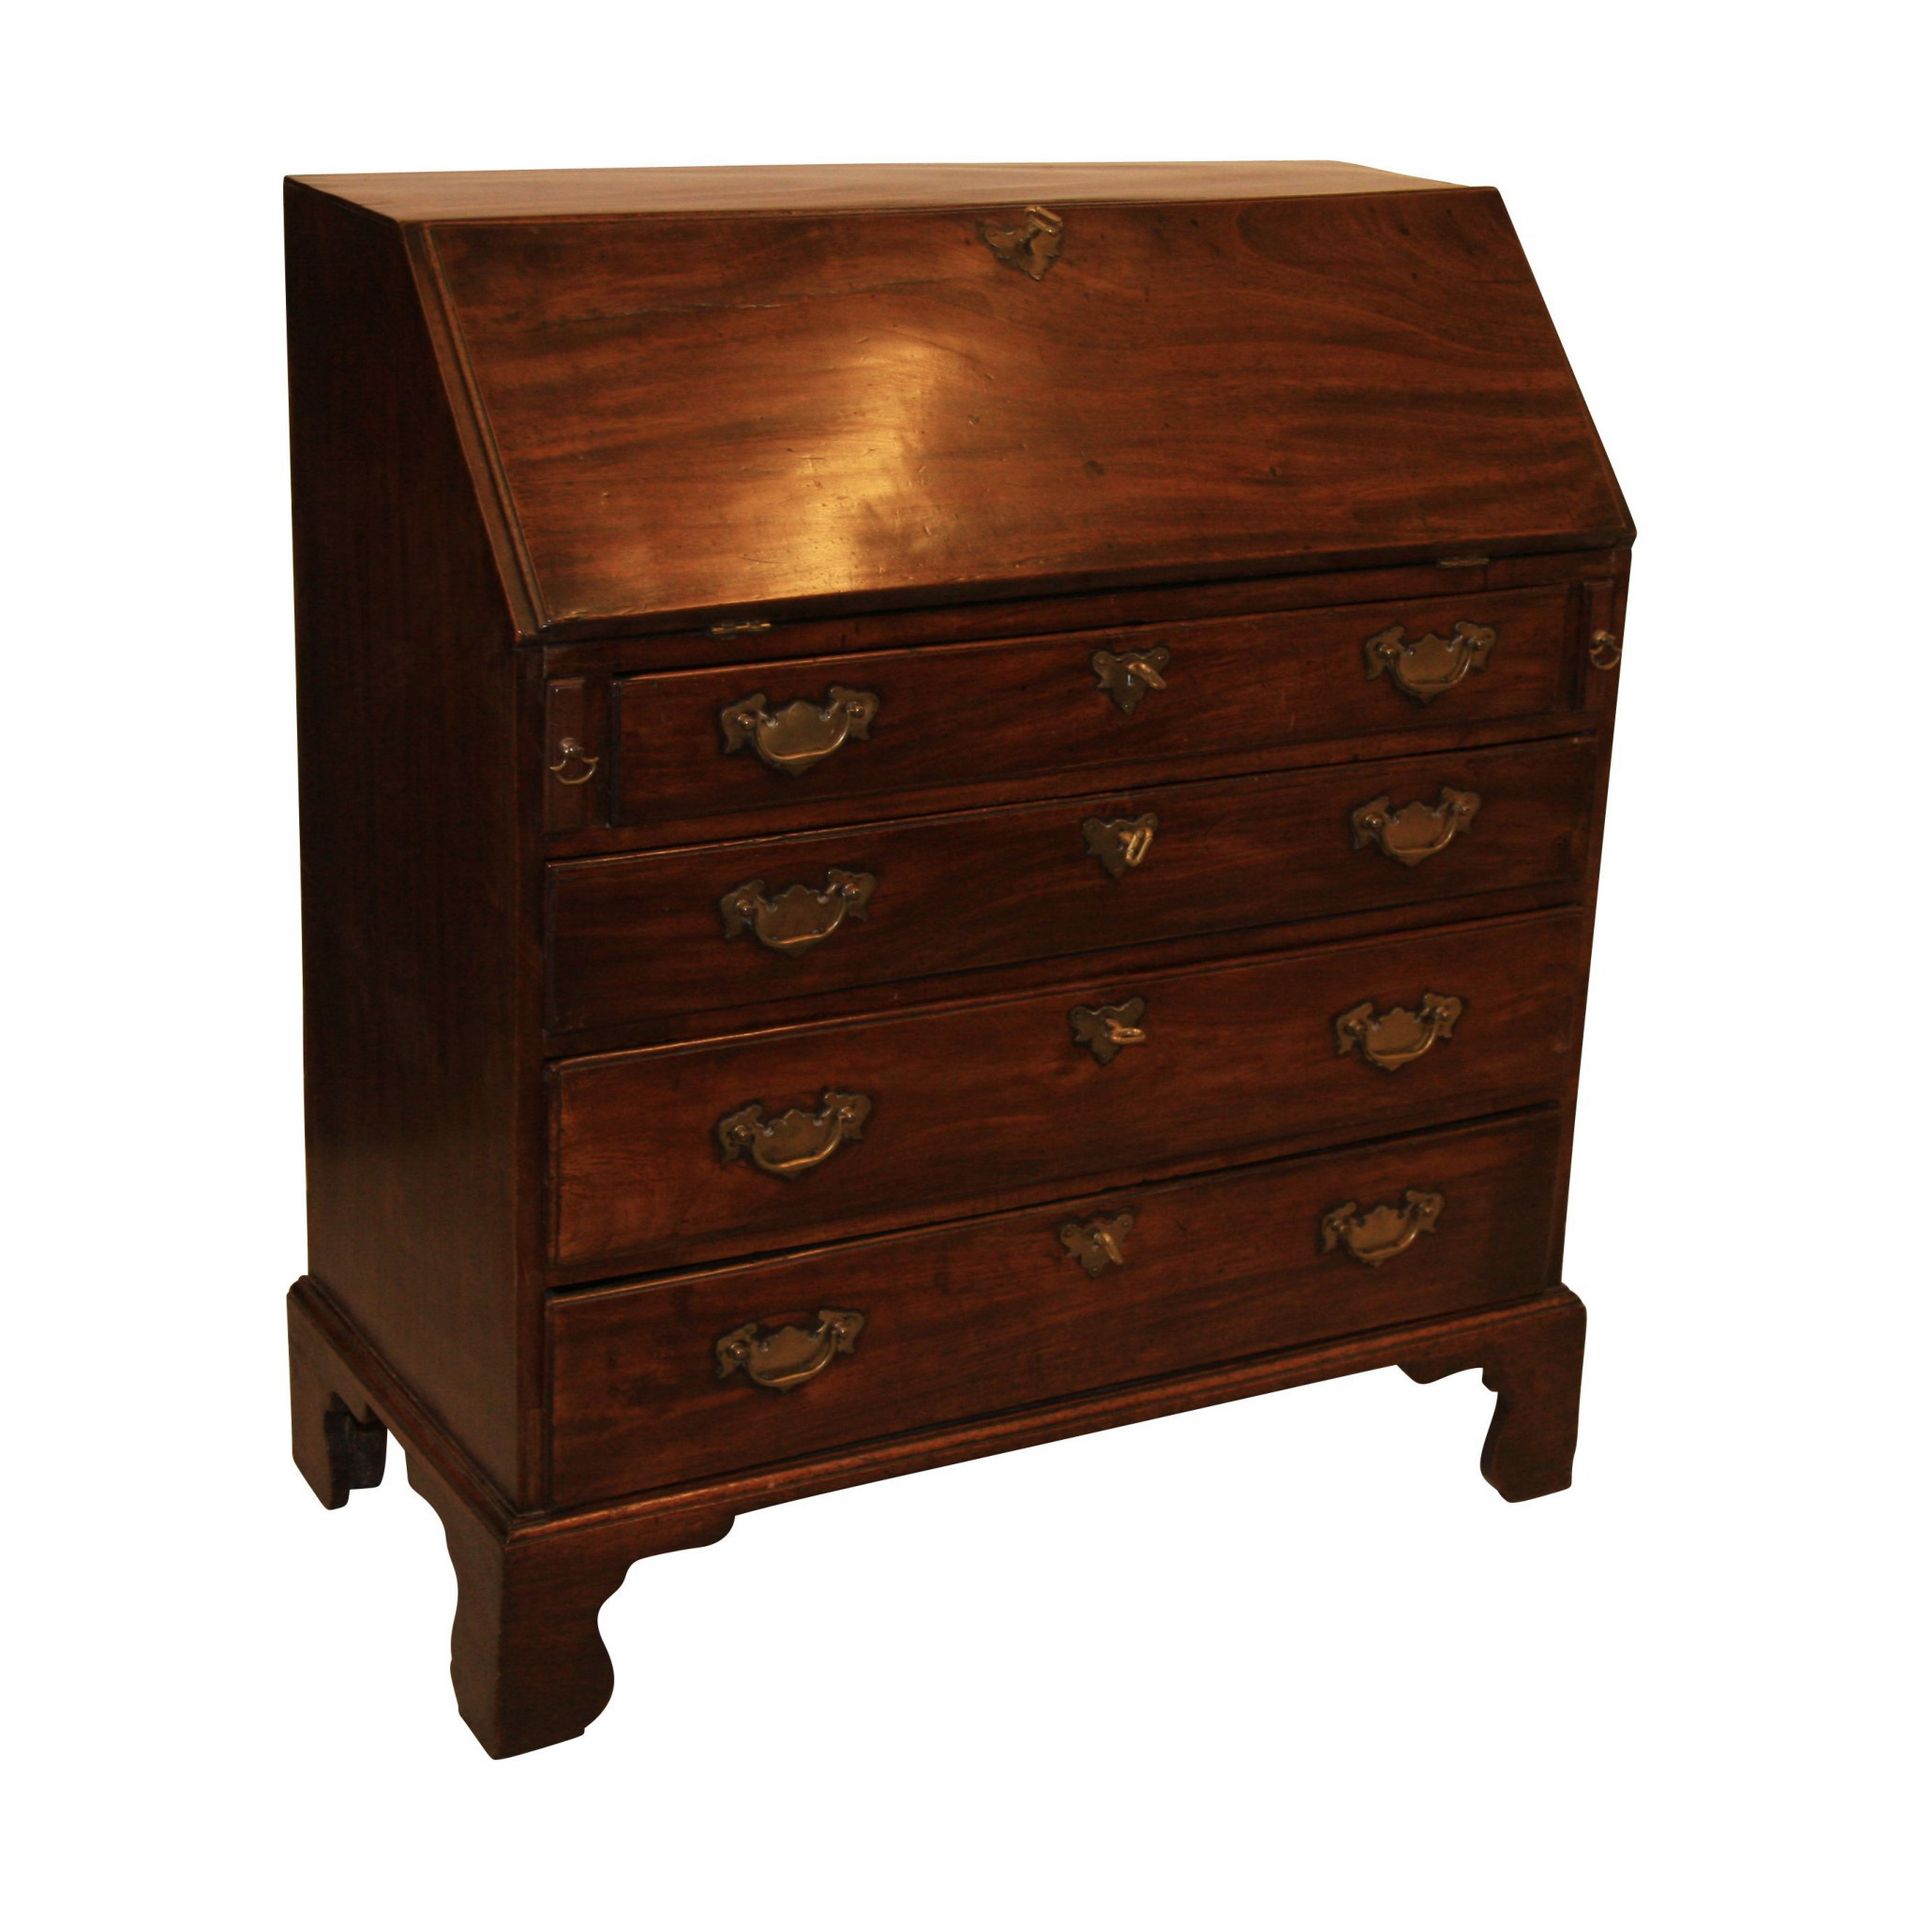 Null desk-chest in mahogany and oak and pine, 4 drawers and lockers inside.

Eng&hellip;